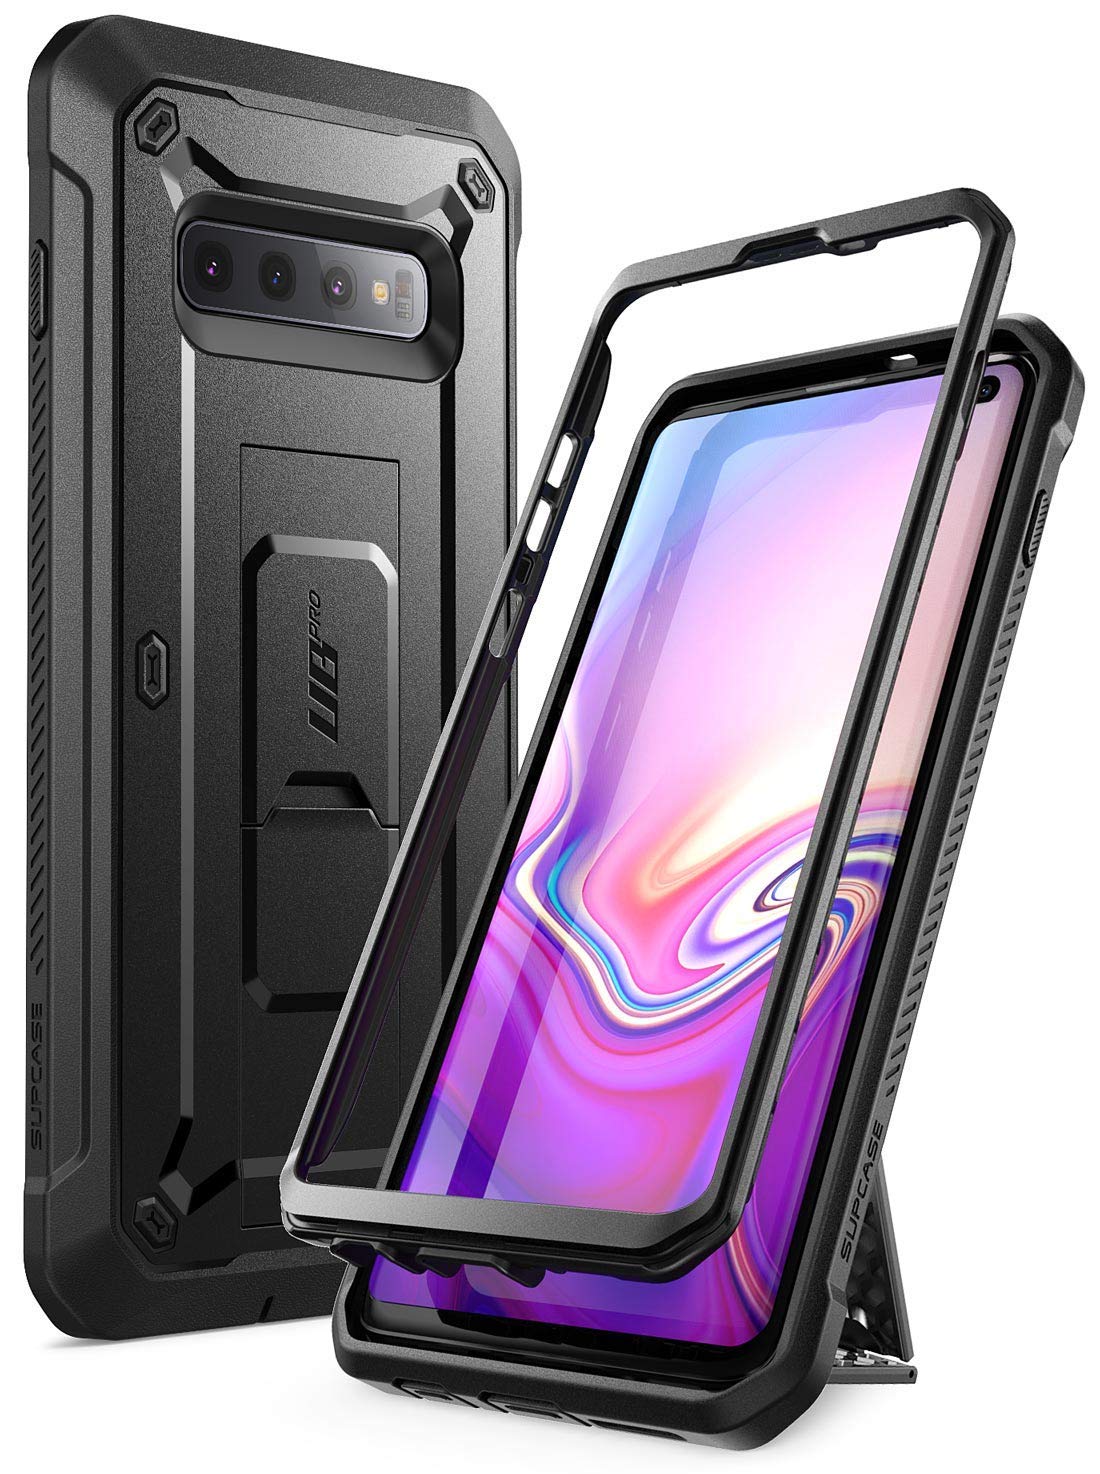 SUPCASE for Samsung Galaxy S10 Case with Satnd (Unicorn Beetle Pro), [Built-in Belt Clip] Heavy Duty Shockproof Rugged Protective Phone Case Without Built-in Screen Protector for Galaxy S10, Black